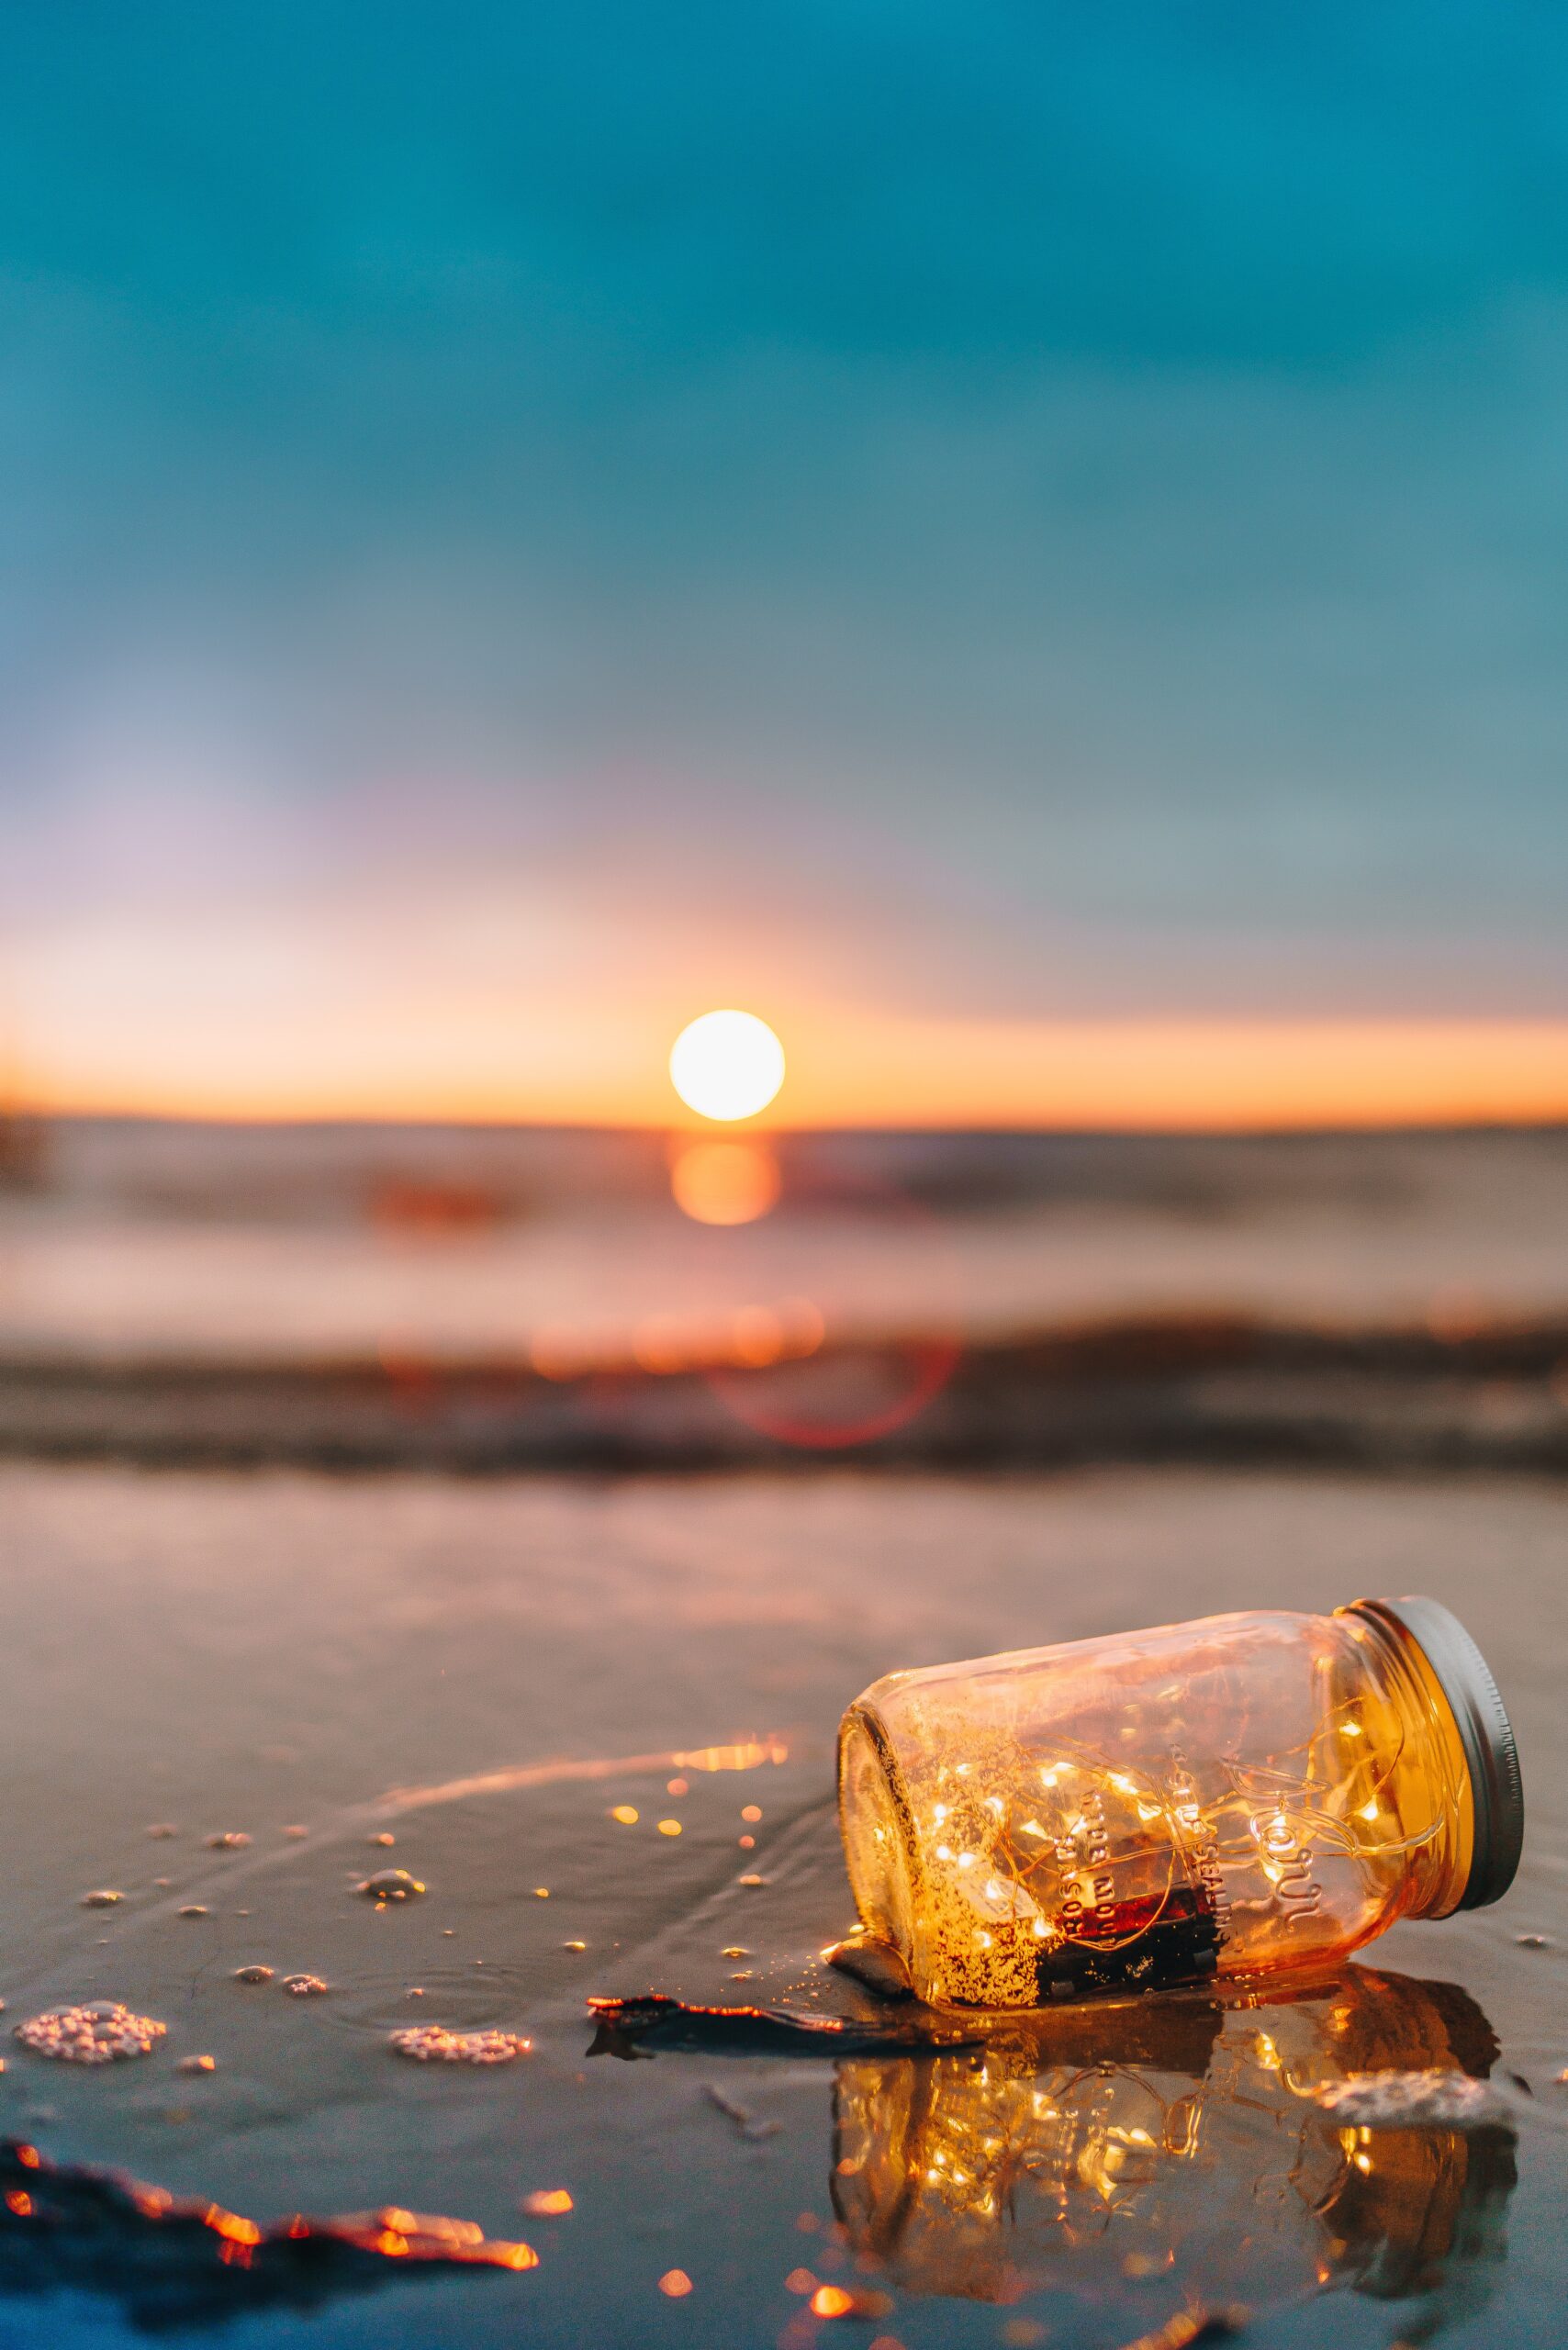 Decorative Image. Fireflies/Lights in a jar at the beach.